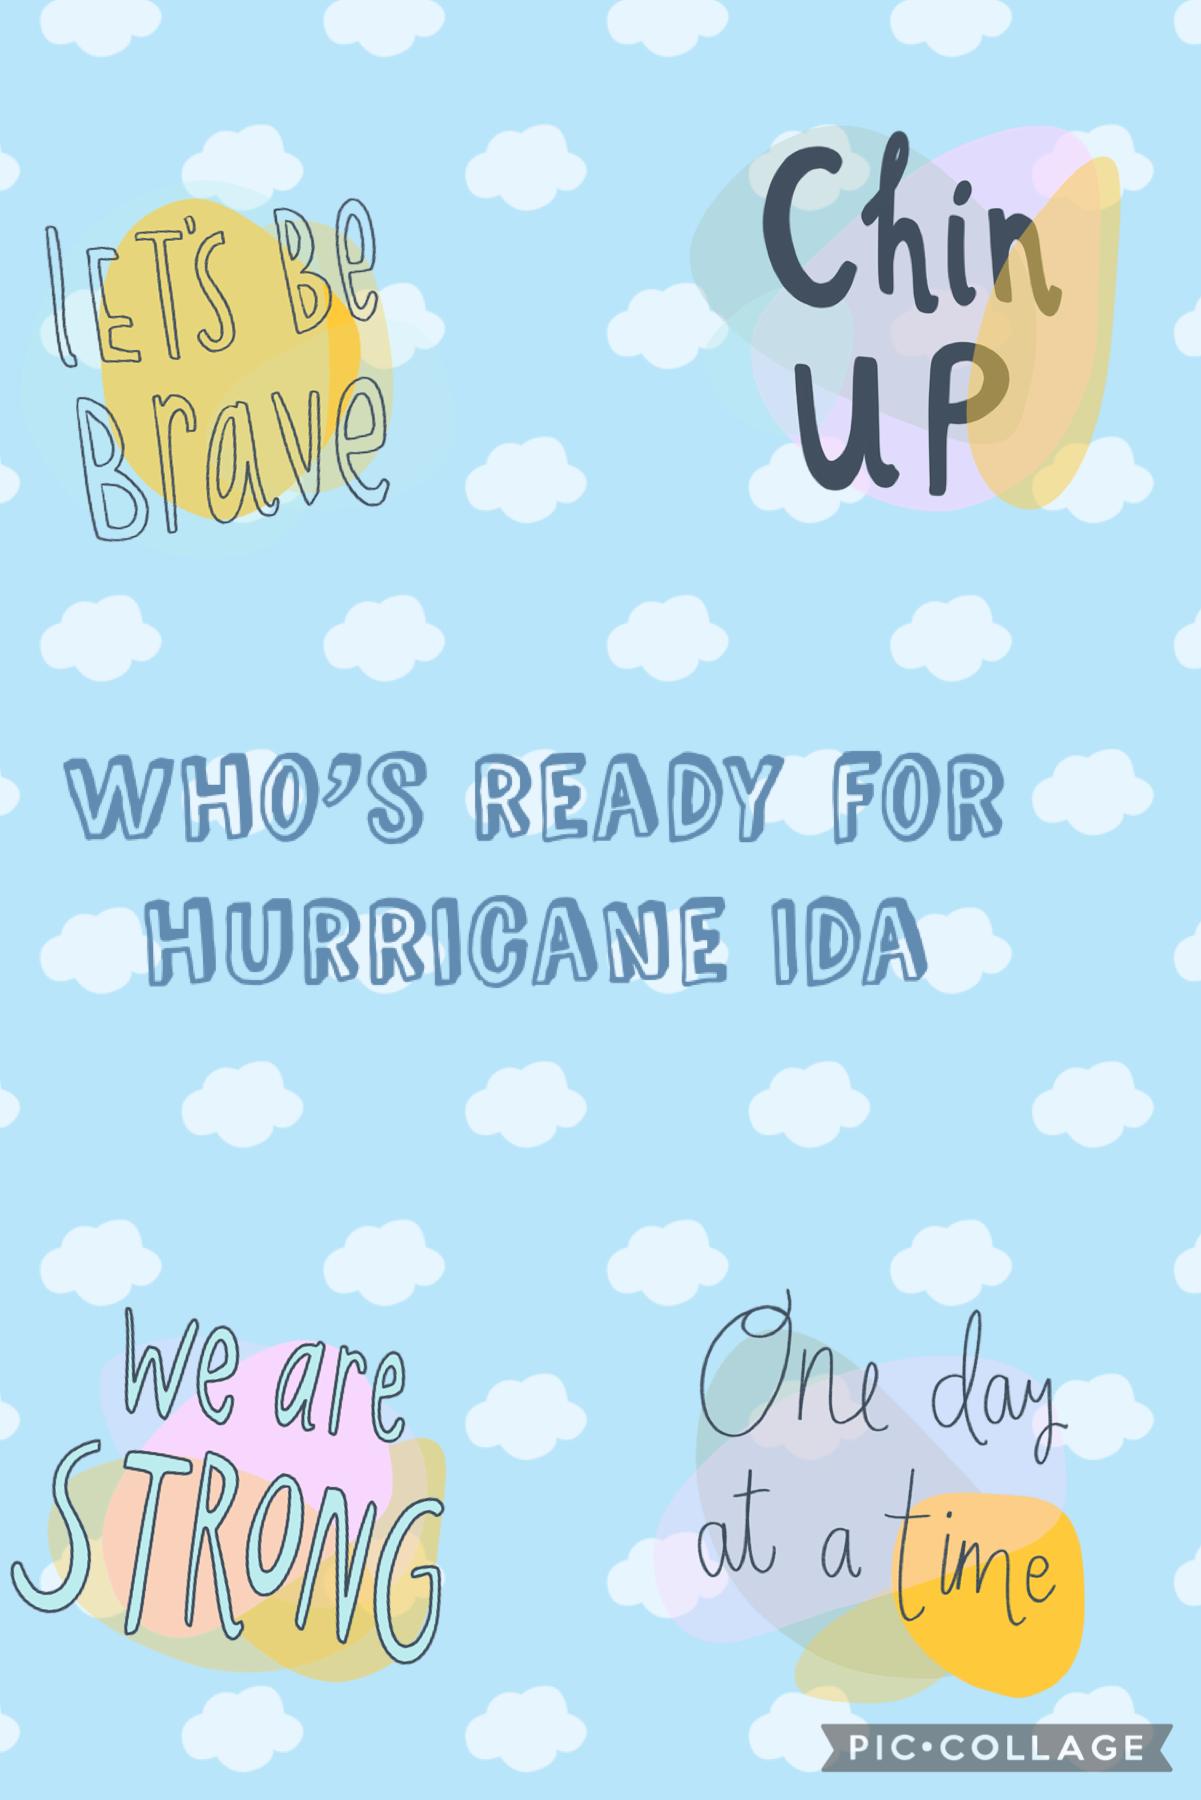 Are you all excited for a hurricane first one of the season🥳🥳🥳

( ps I am being sarcastic )